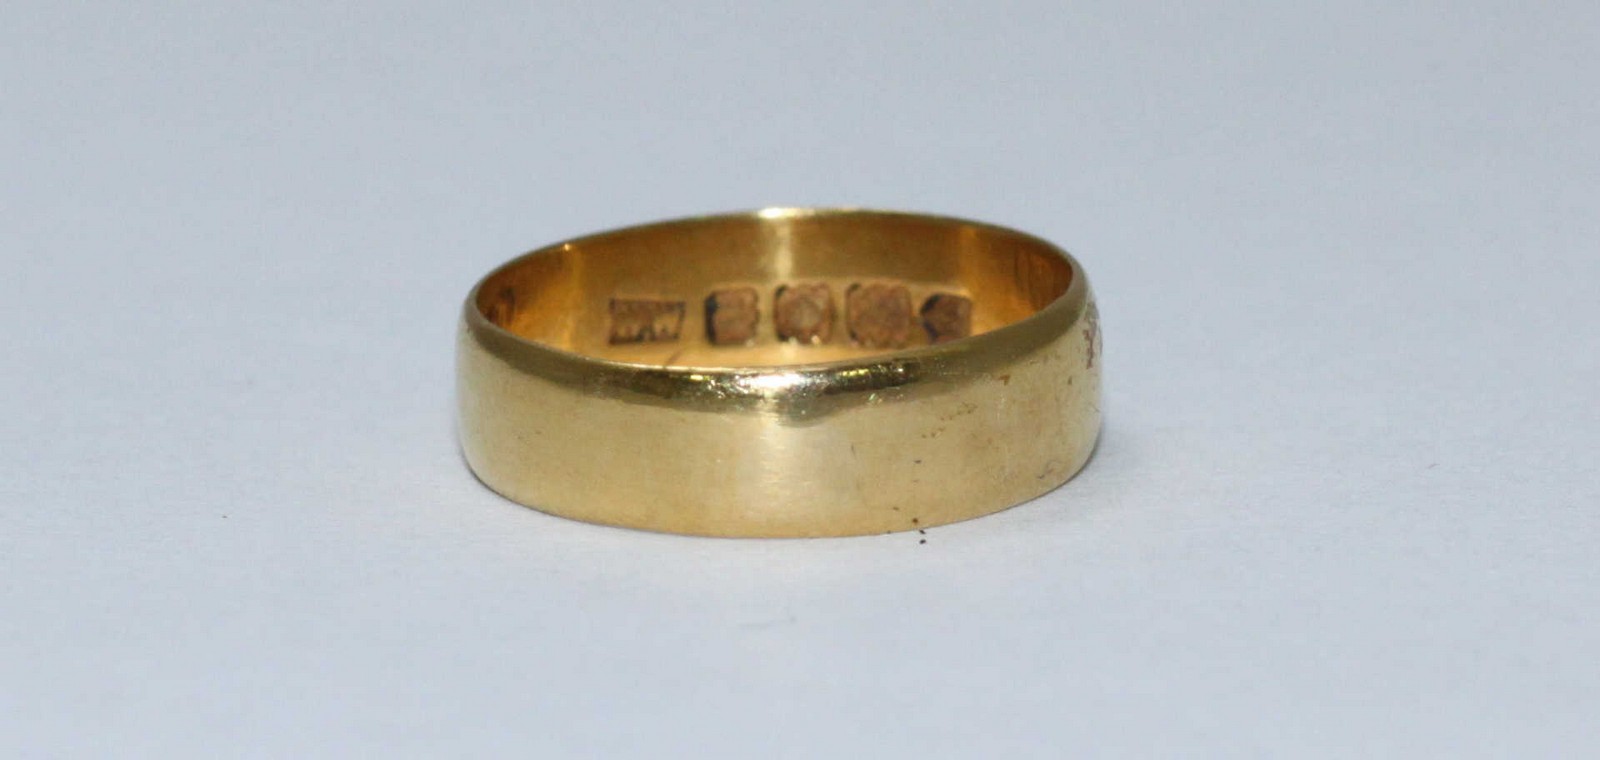 A 22ct gold plain wedding band. Gross weight approximately 3.0g